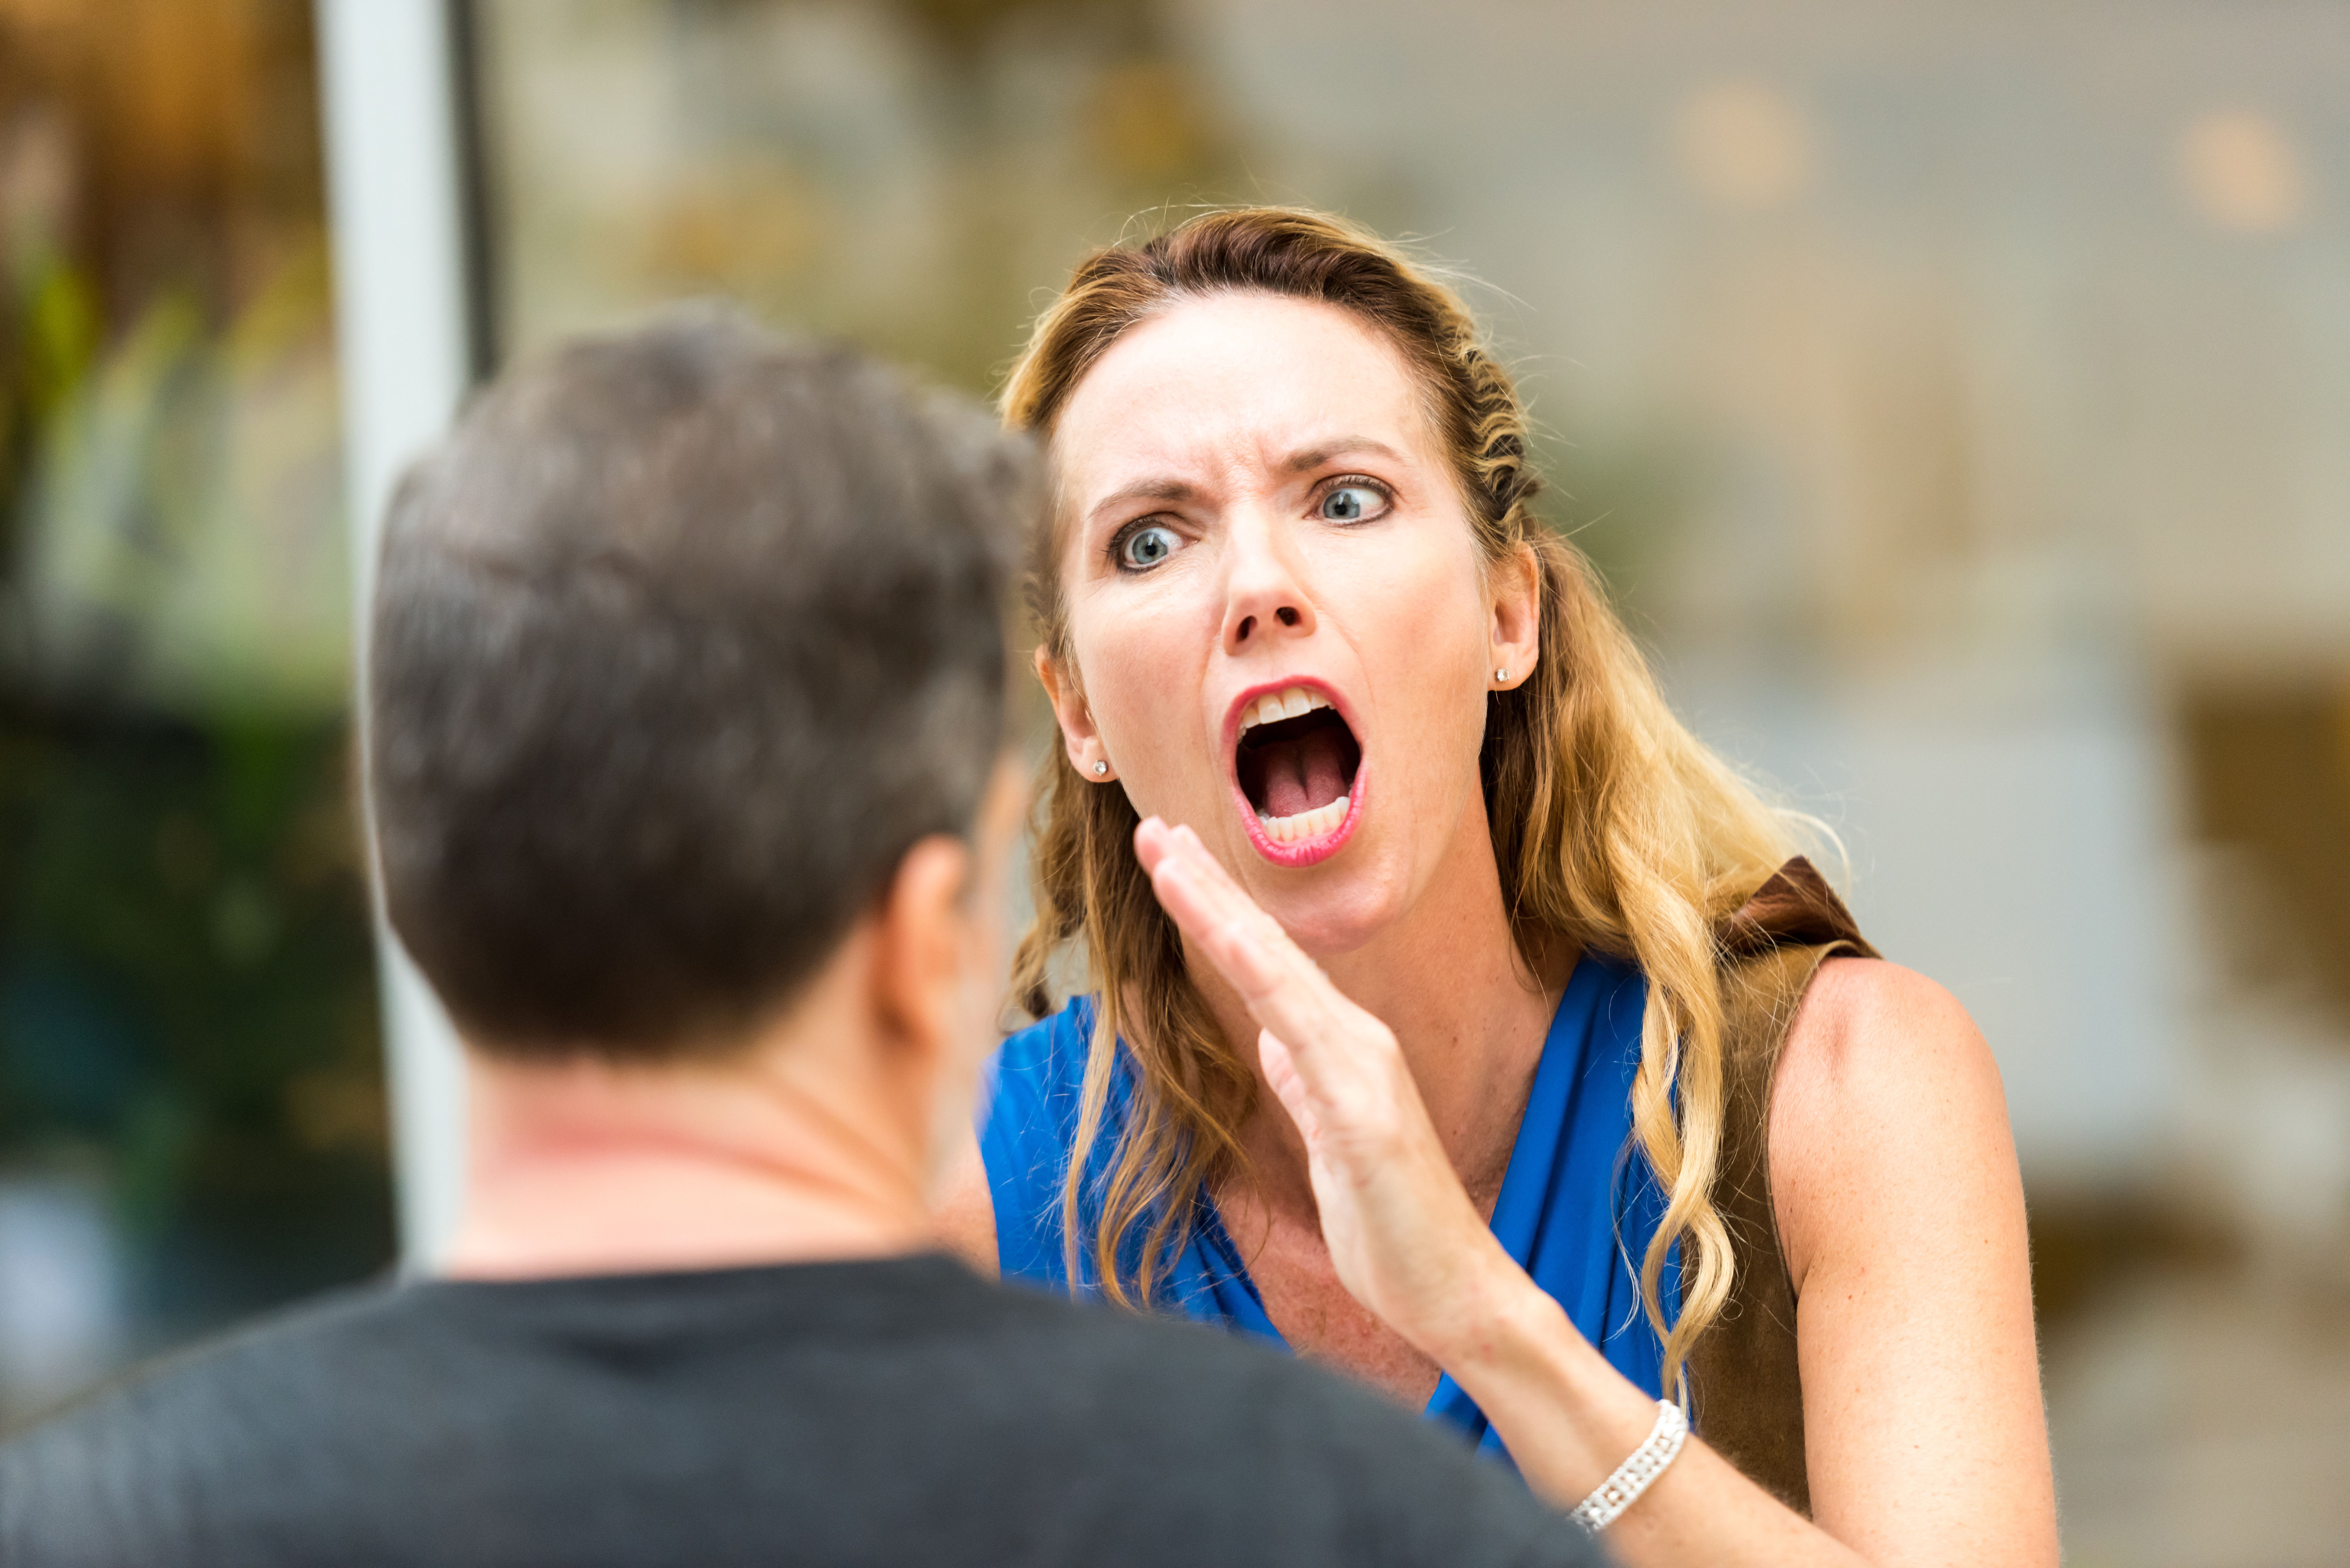 A woman screming | Source: Getty Images